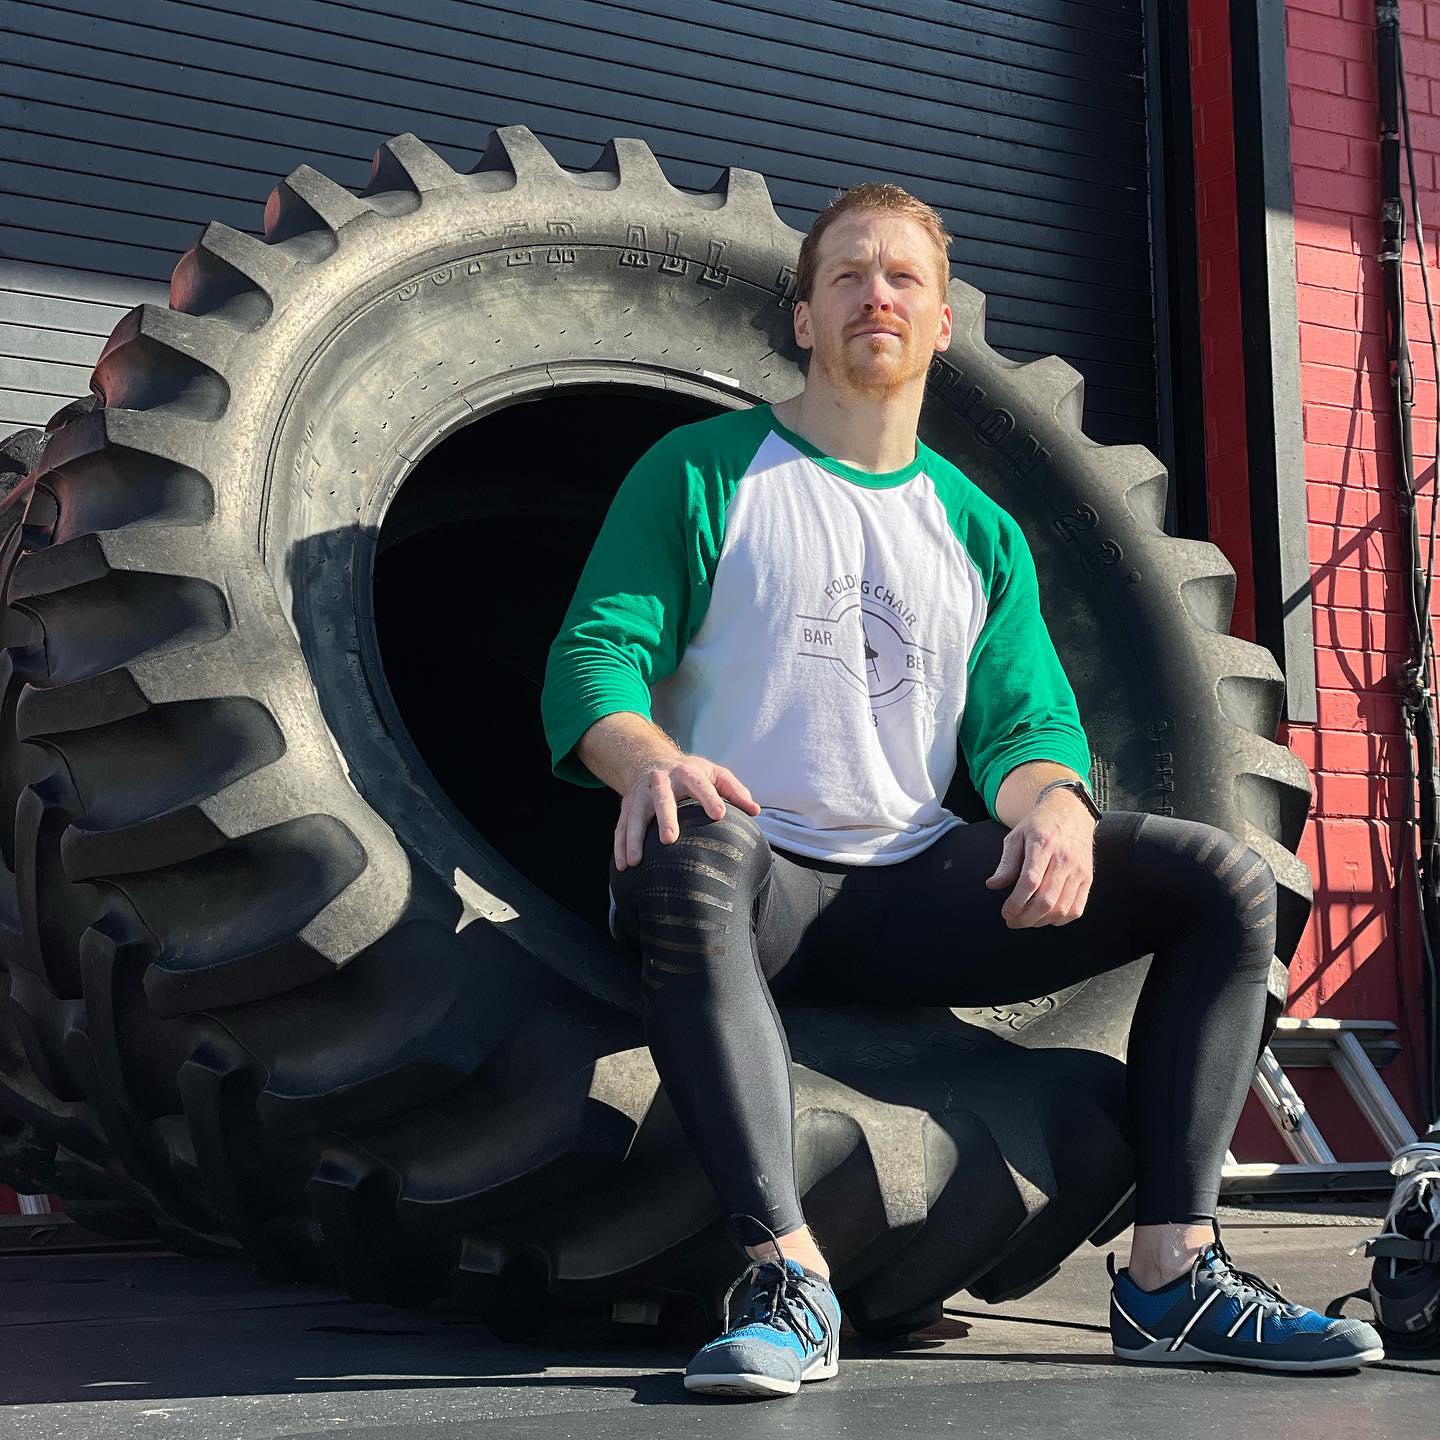 Man sitting on a large industrial tire wearing the Folding Chair Barbell Club raglan tee.